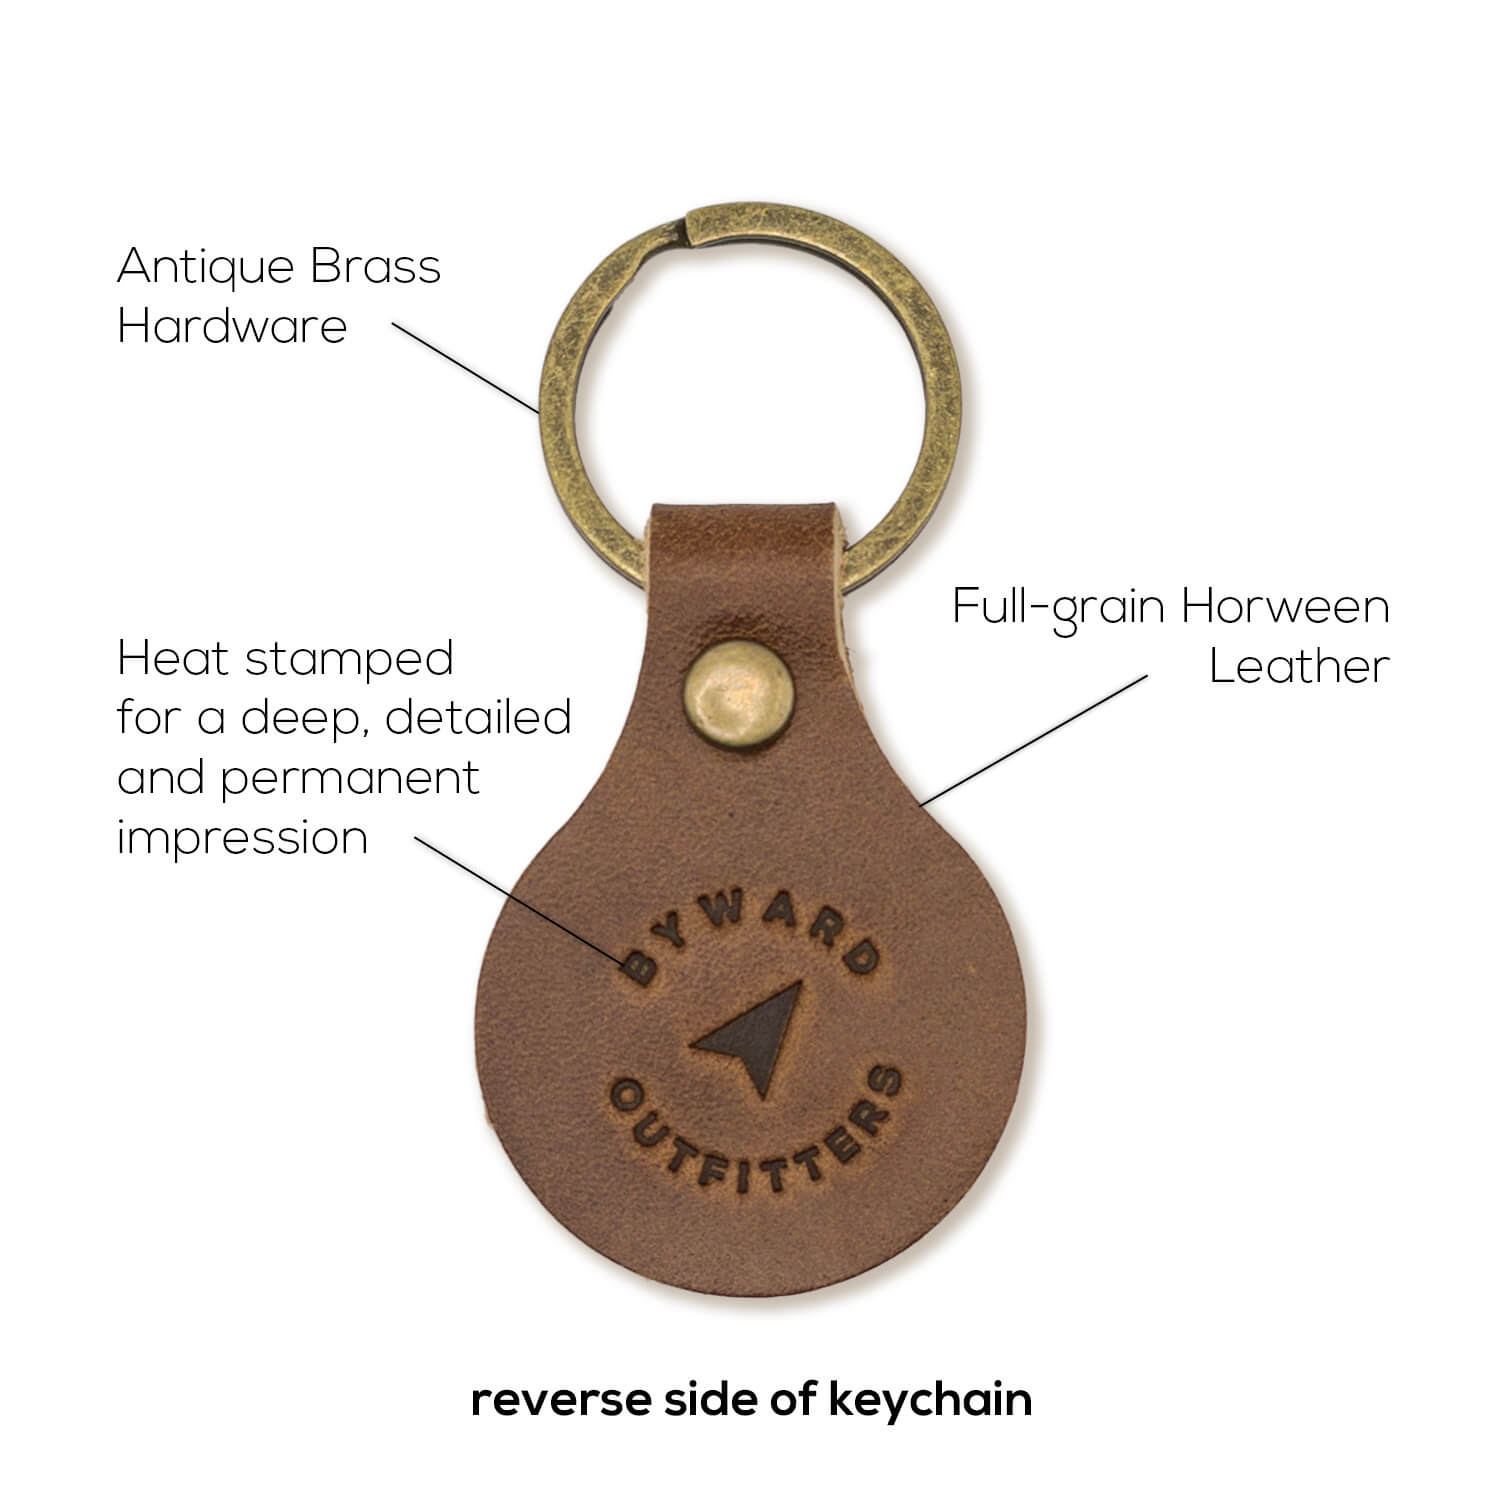 Personalized Leather Keychain